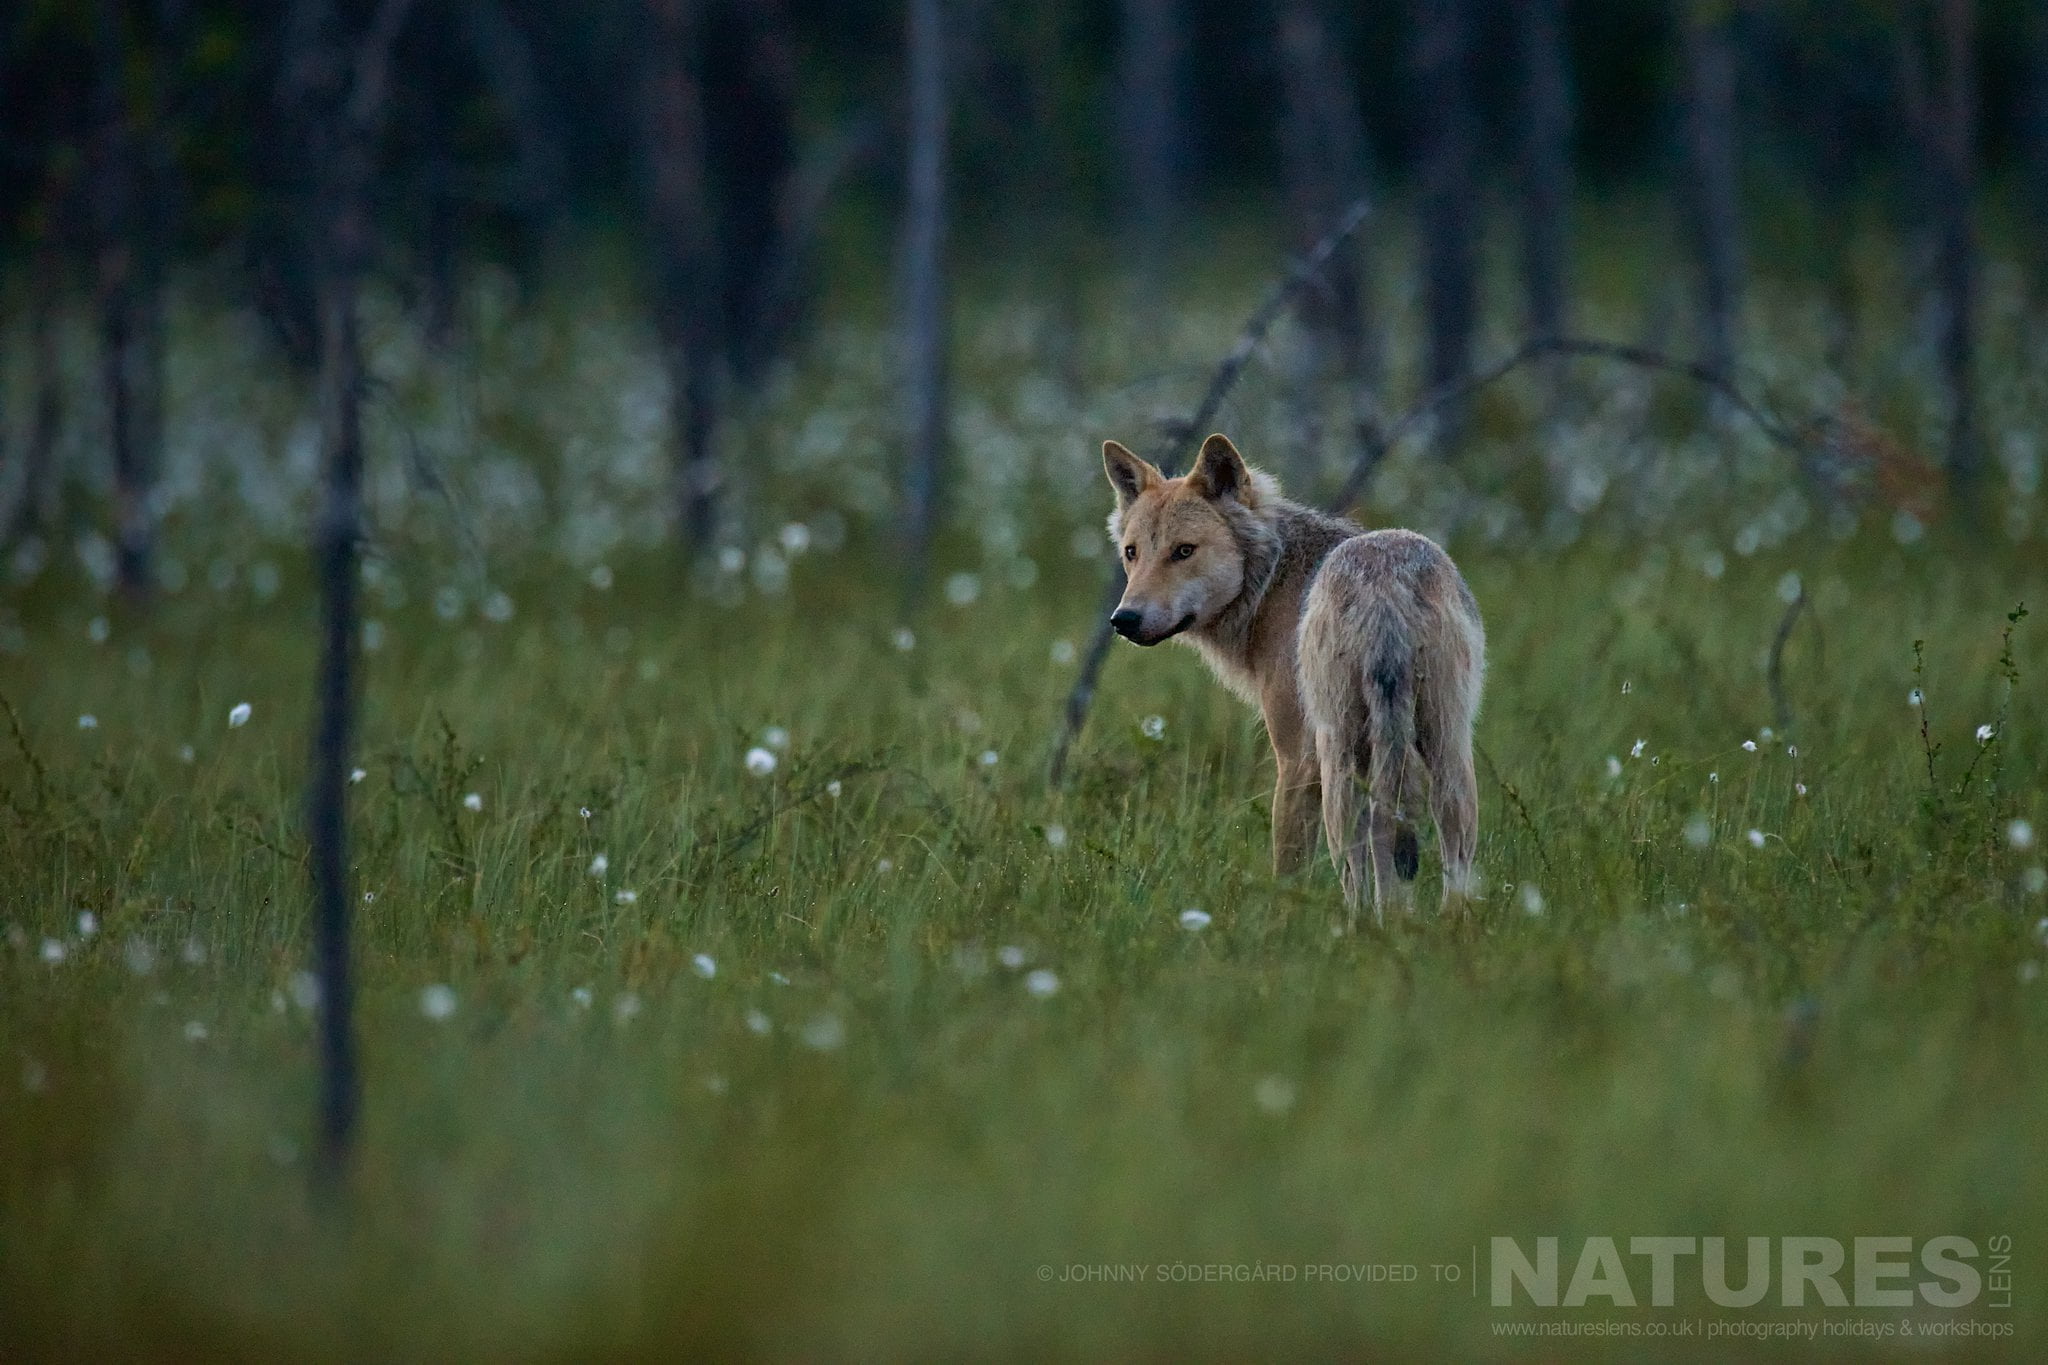 A Finnish Wolf A Rare Visitor To The Hides Photographed By Johnny Södergård During The Natureslens Wild Brown Bears Of Finland Photography Holiday